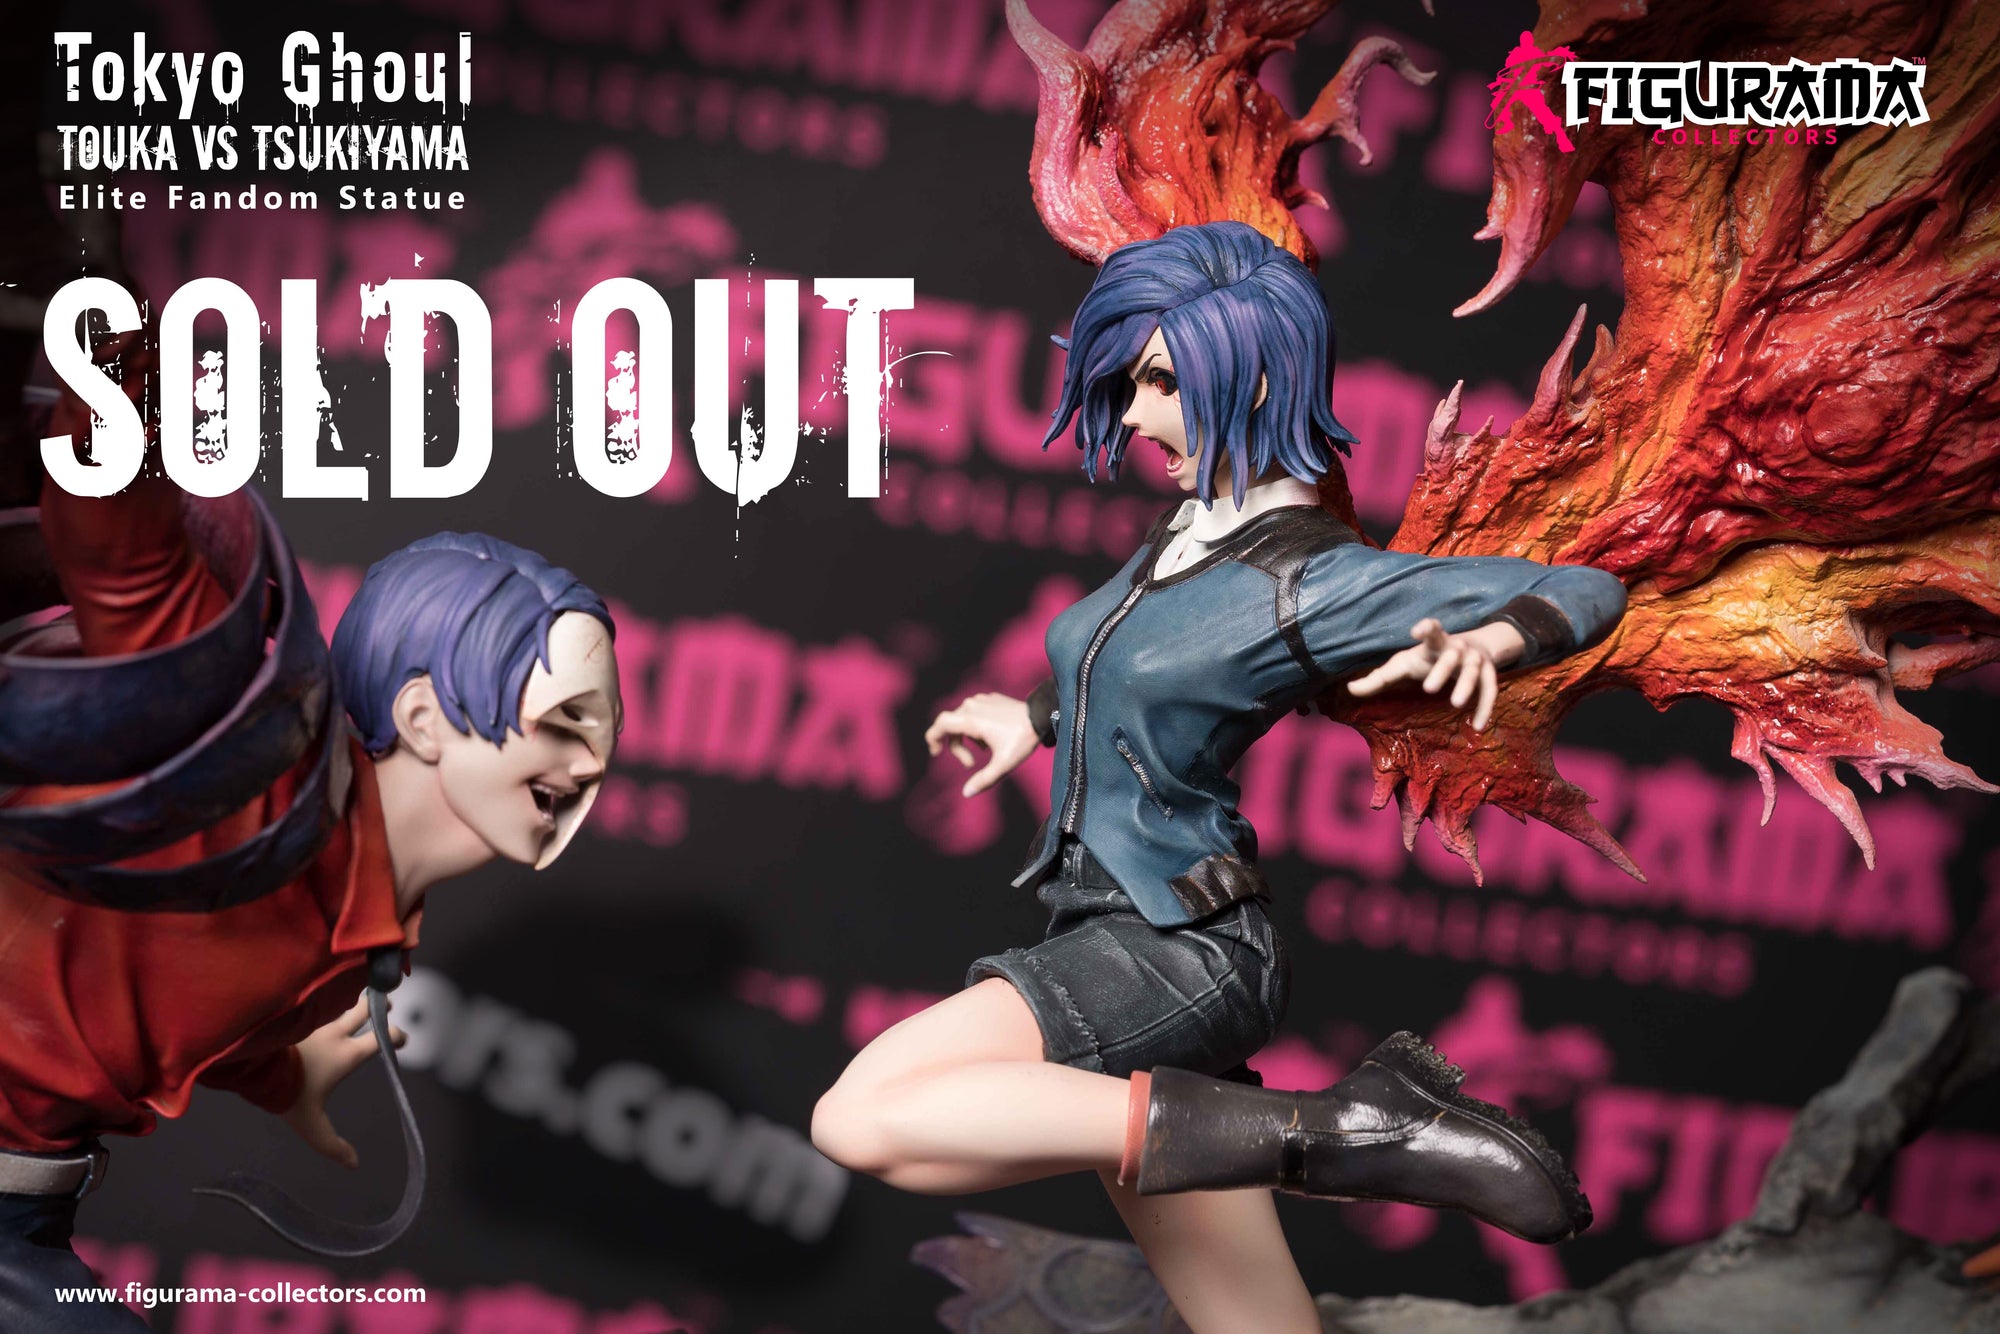 SOLD OUT!: Touka VS Tsukiyama Elite Fandom Statue Breaks Record as Fastest-Selling Tokyo Ghoul Statue!